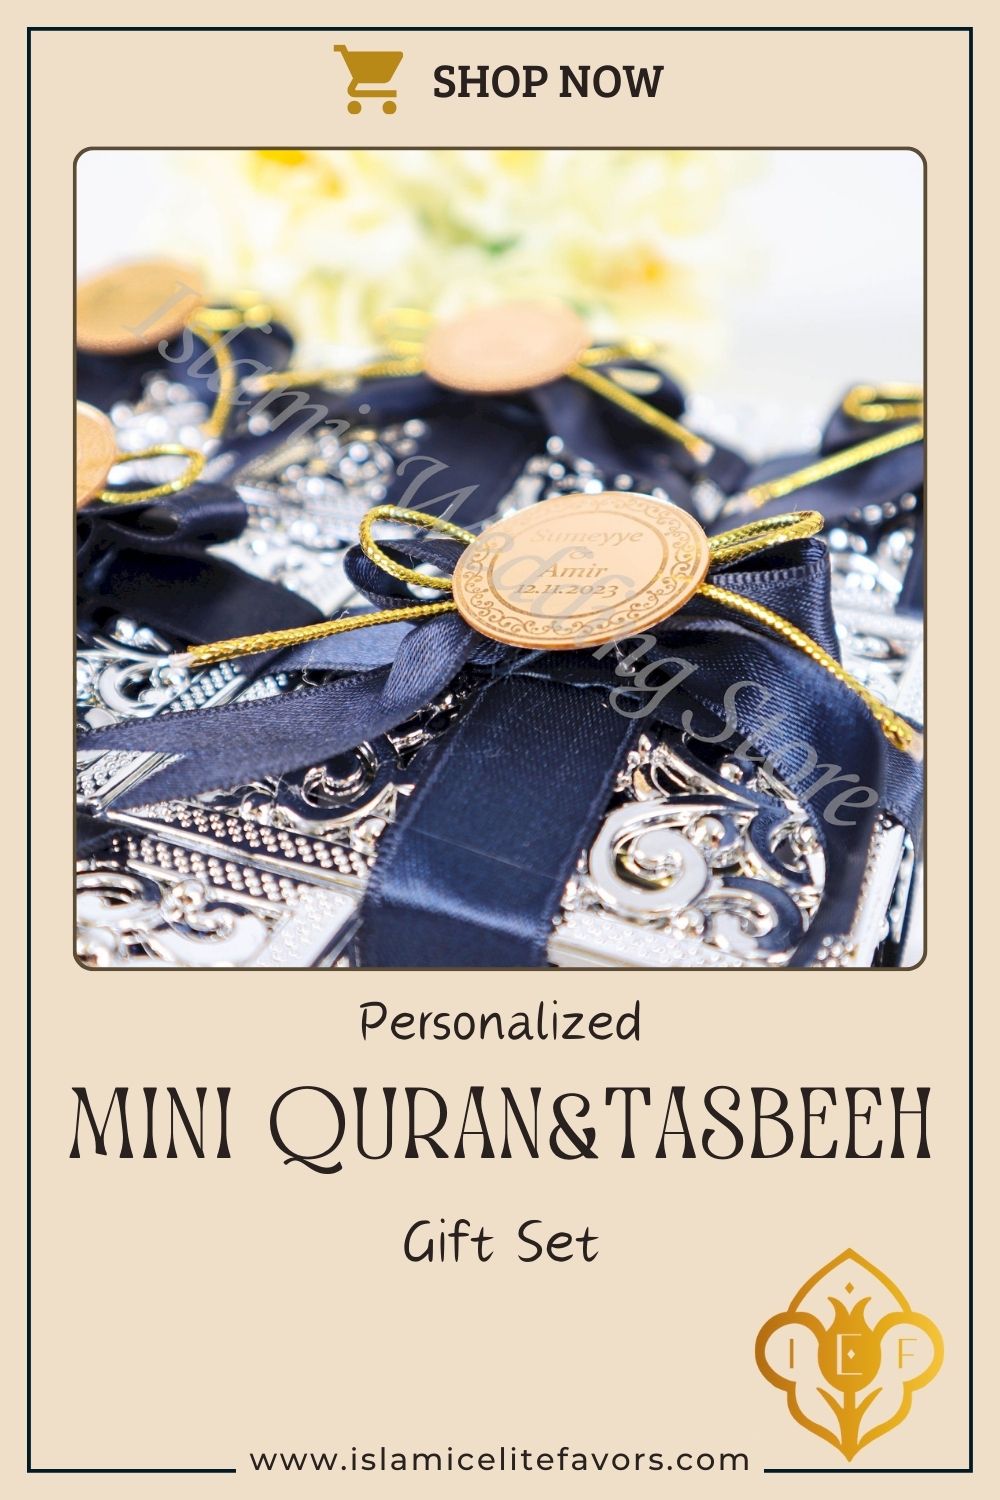 Personalized Luxury Silver Box Mini Quran Pearl Tasbeeh Wedding Favor - Islamic Elite Favors is a handmade gift shop offering a wide variety of unique and personalized gifts for all occasions. Whether you're looking for the perfect Ramadan, Eid, Hajj, wedding gift or something special for a birthday, baby shower or anniversary, we have something for everyone. High quality, made with love.